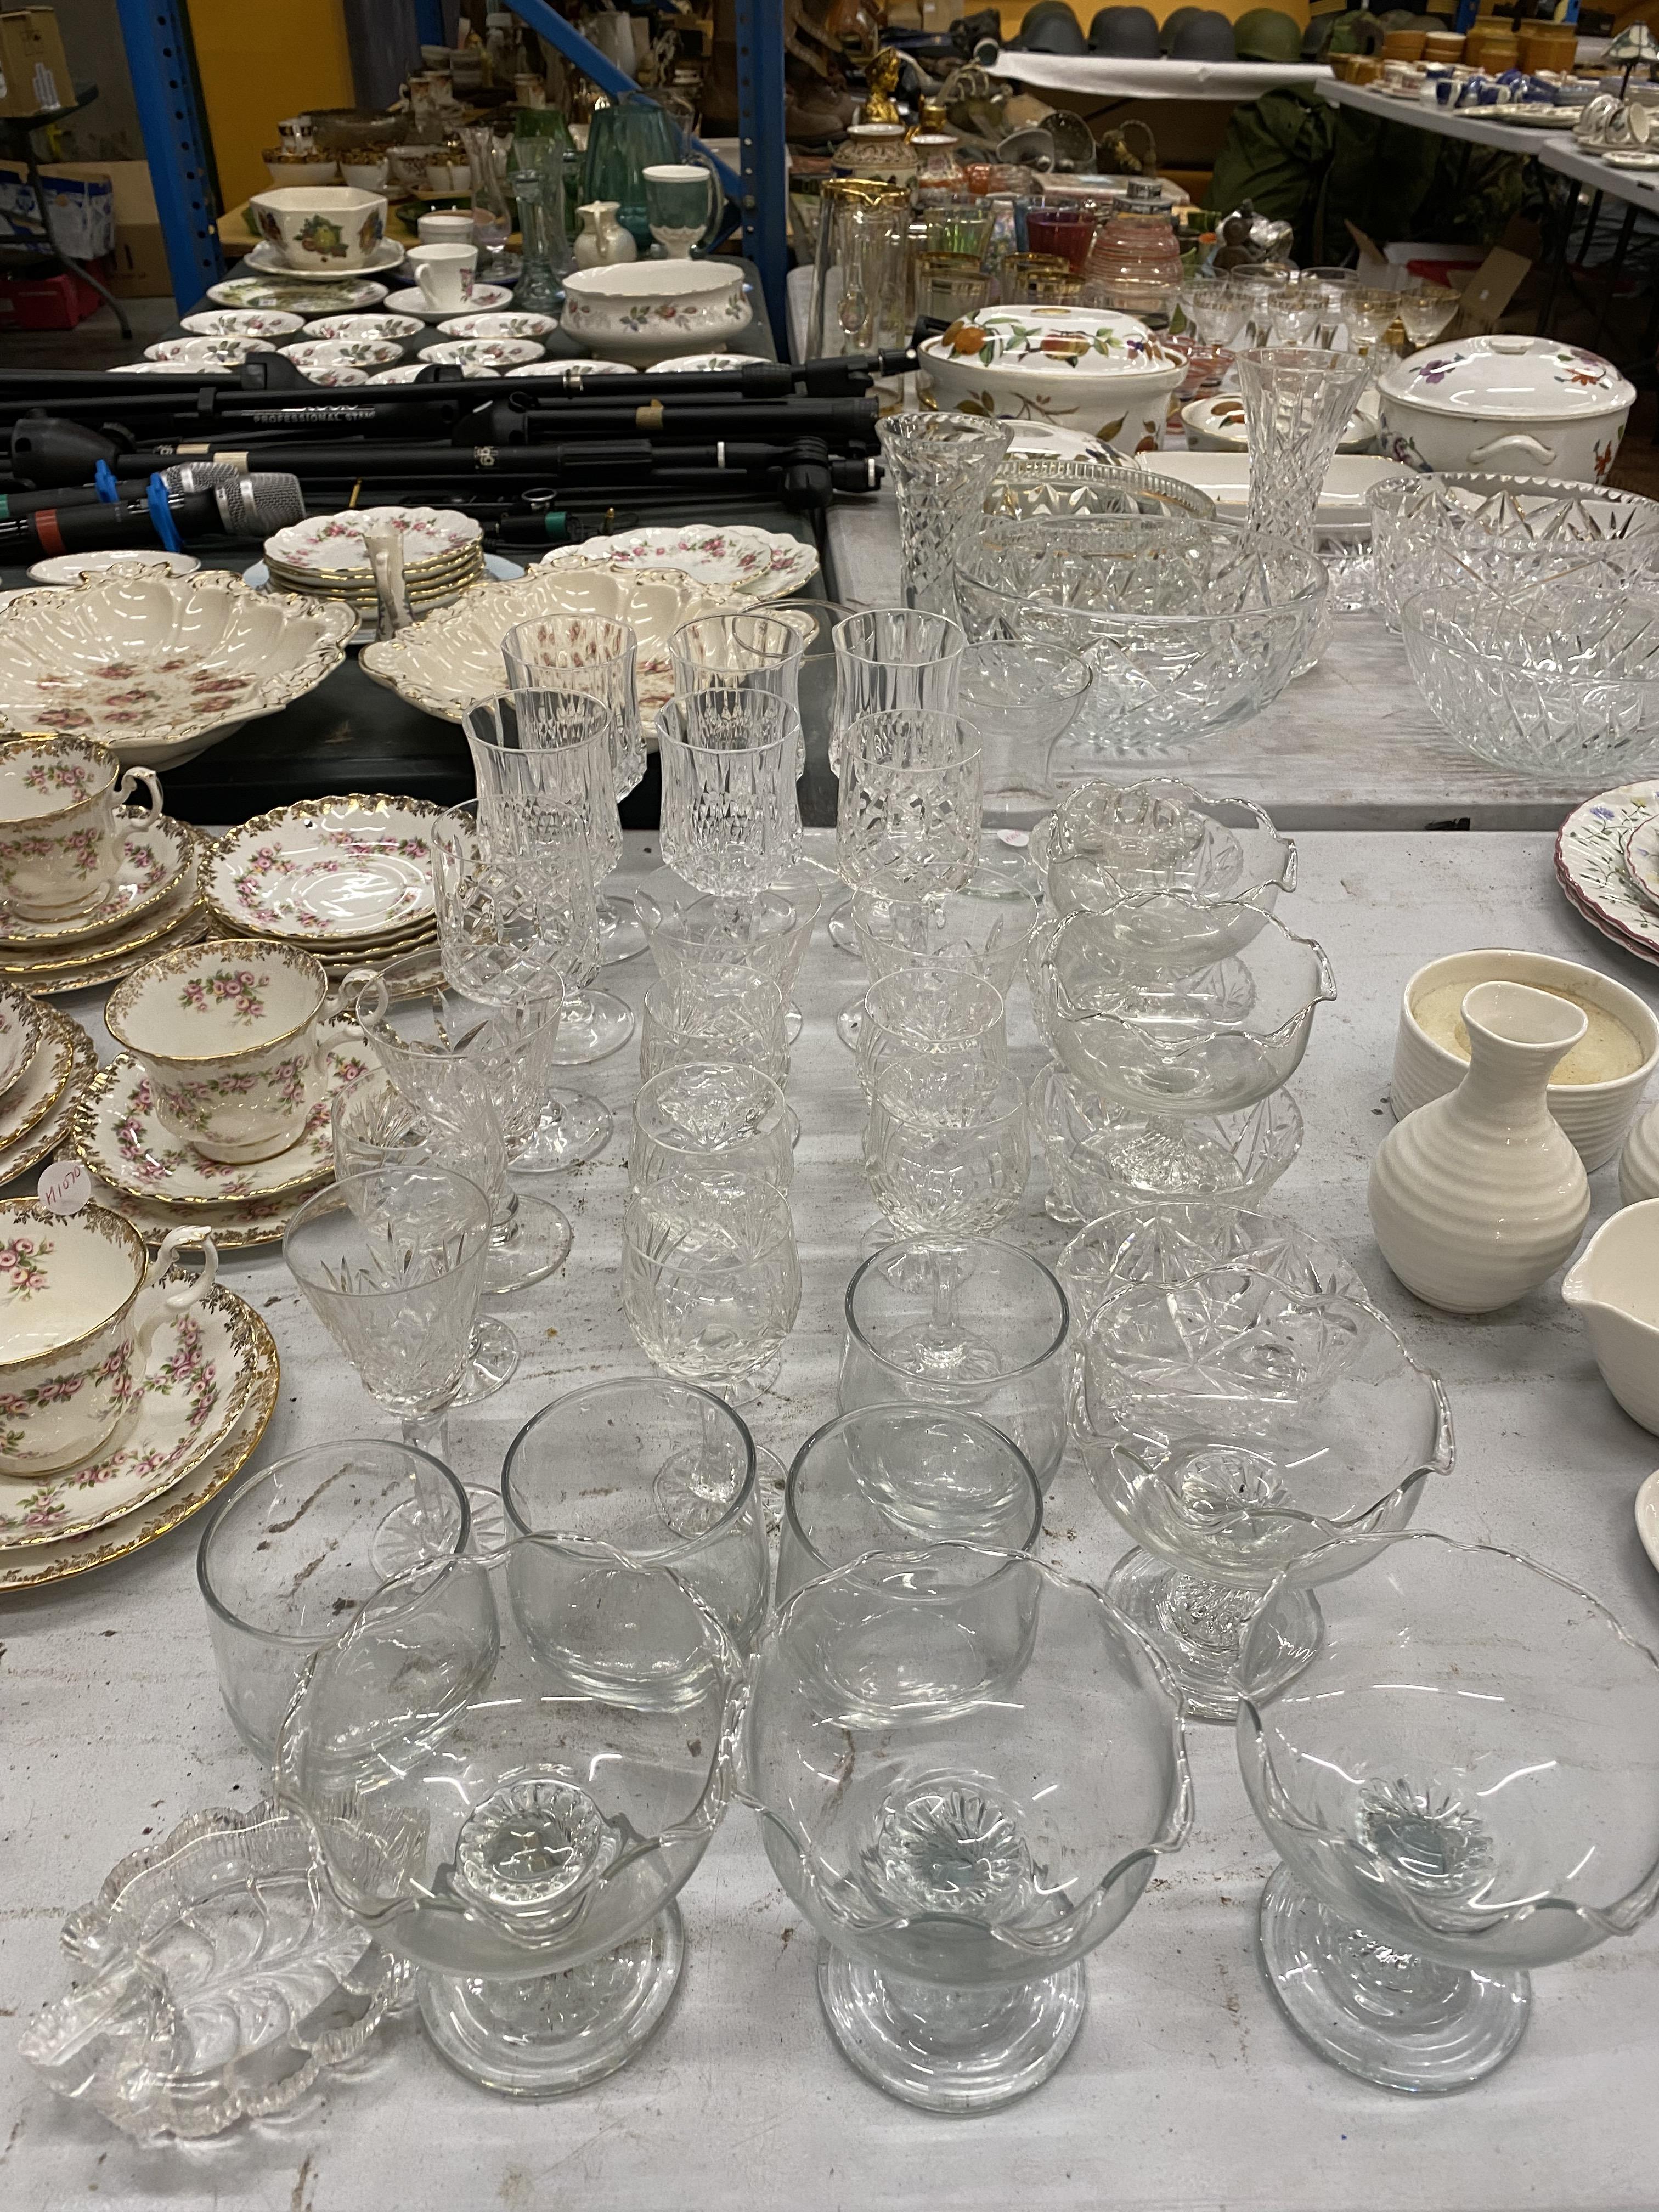 VARIDISHES ETCOUS ITEMS OF GLASSWARE TO INCLUDE GLASSES, DISHES ETC - Image 2 of 8